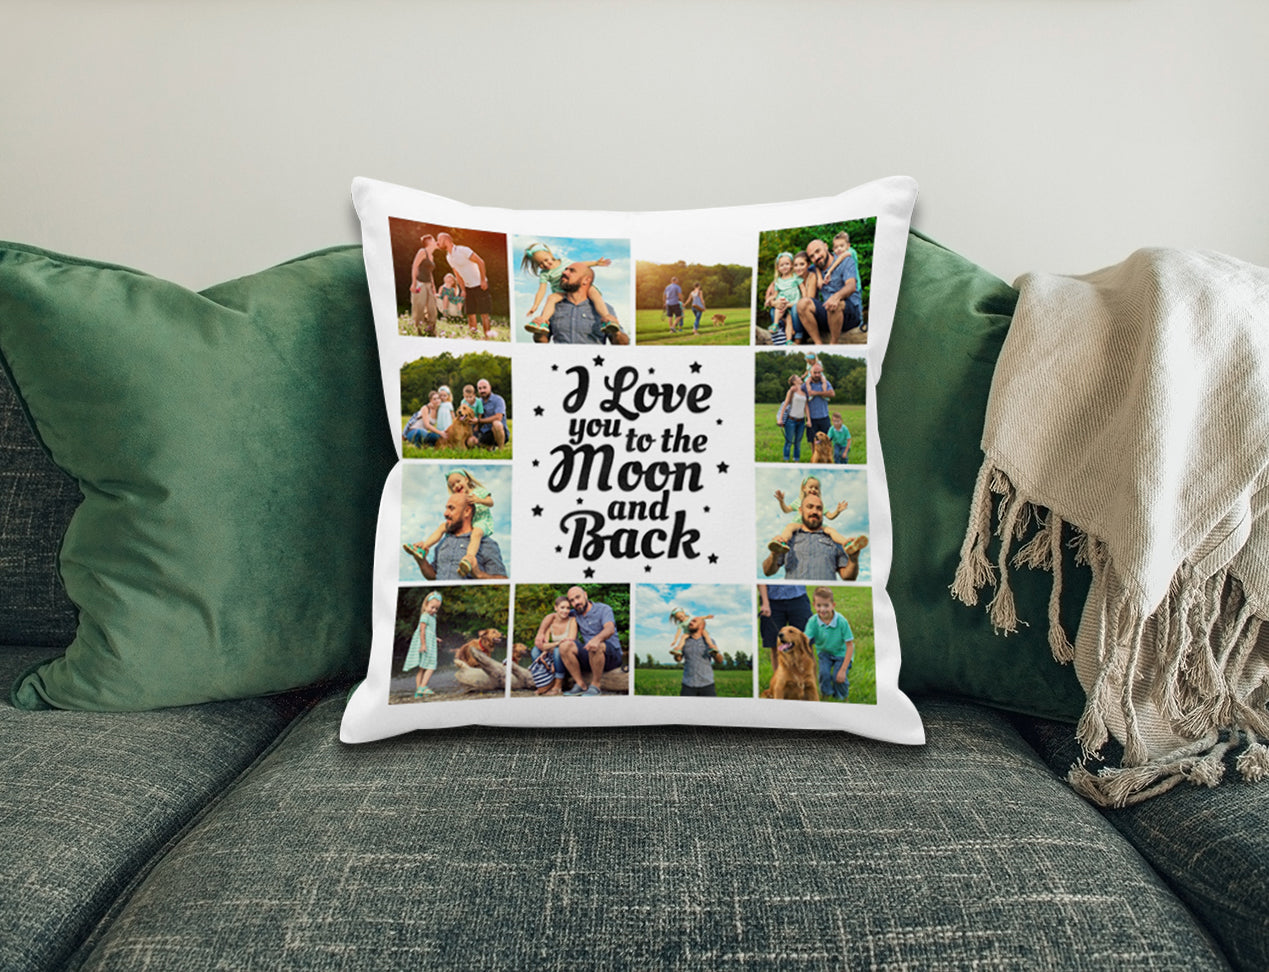 Personalised Cushion Cover with collage of photos and motivational text